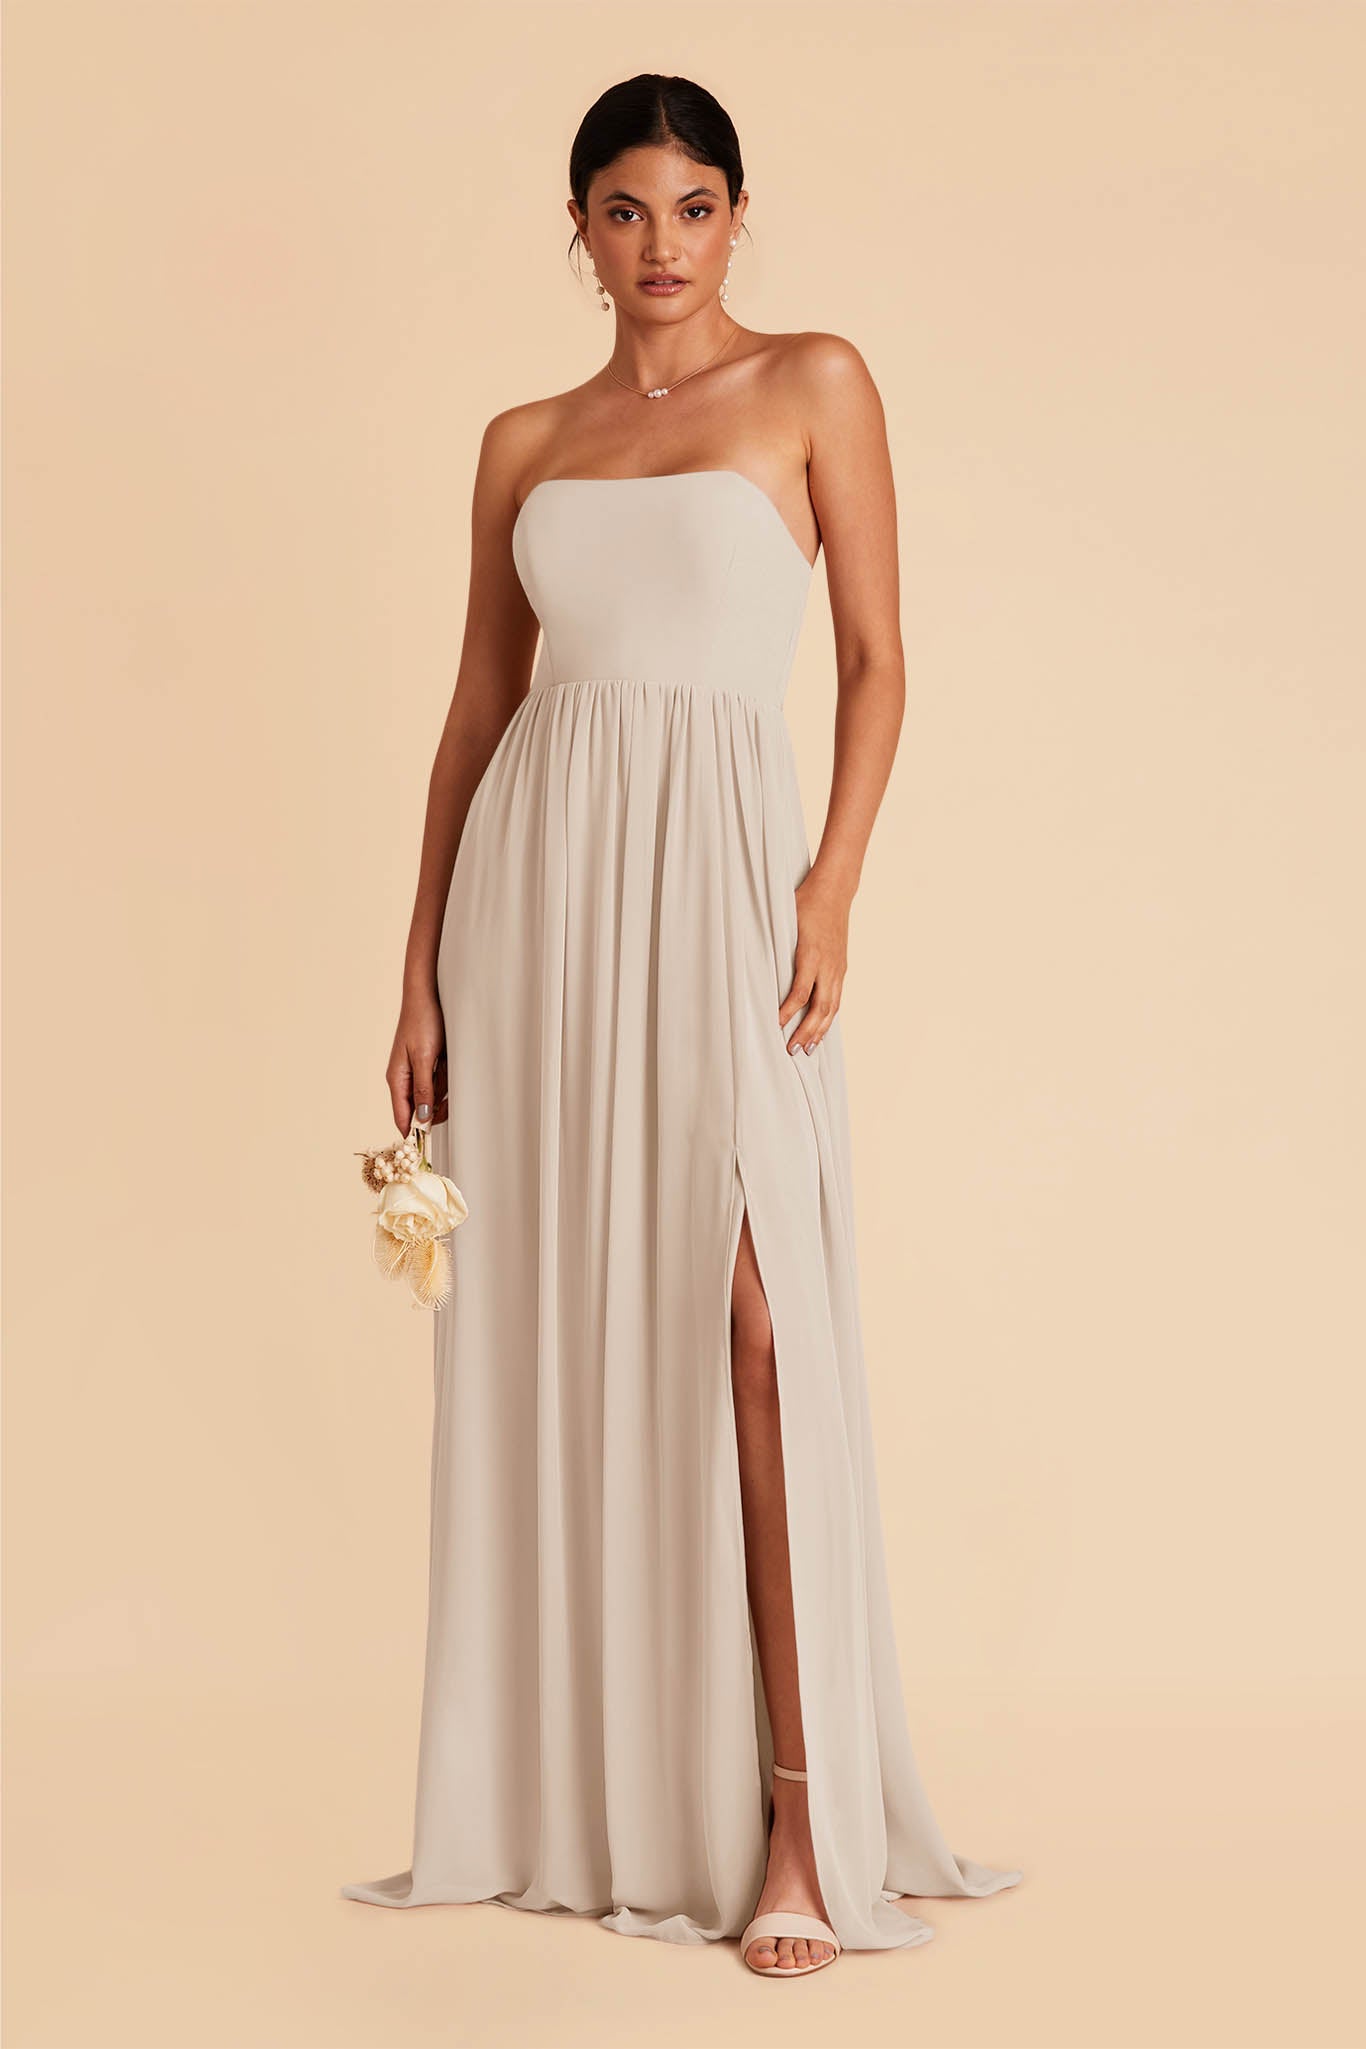 August Convertible Dress - Neutral Champagne